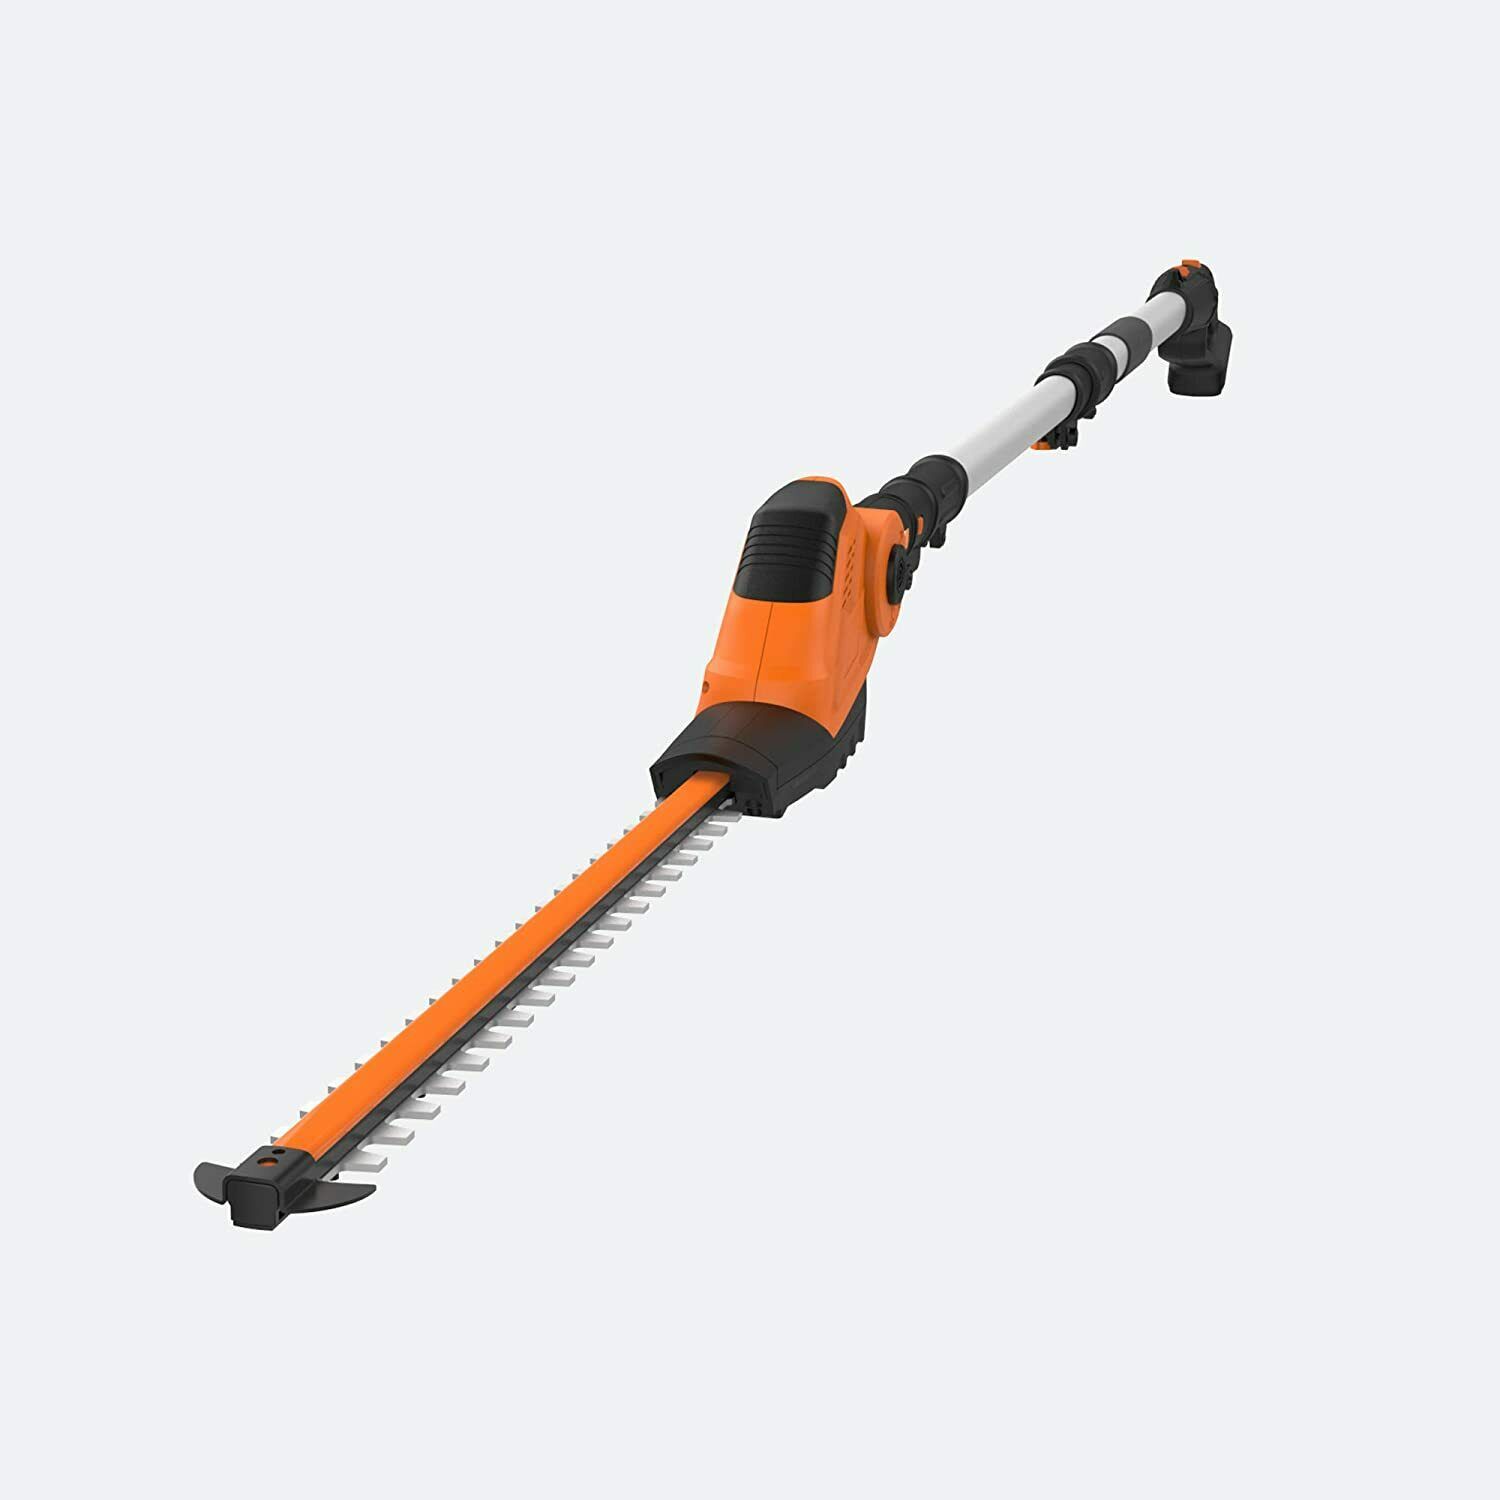 WORX WG252.9 20V 2-in-1 Hedge Trimmer w/ attachement capabilities (Tool Only)